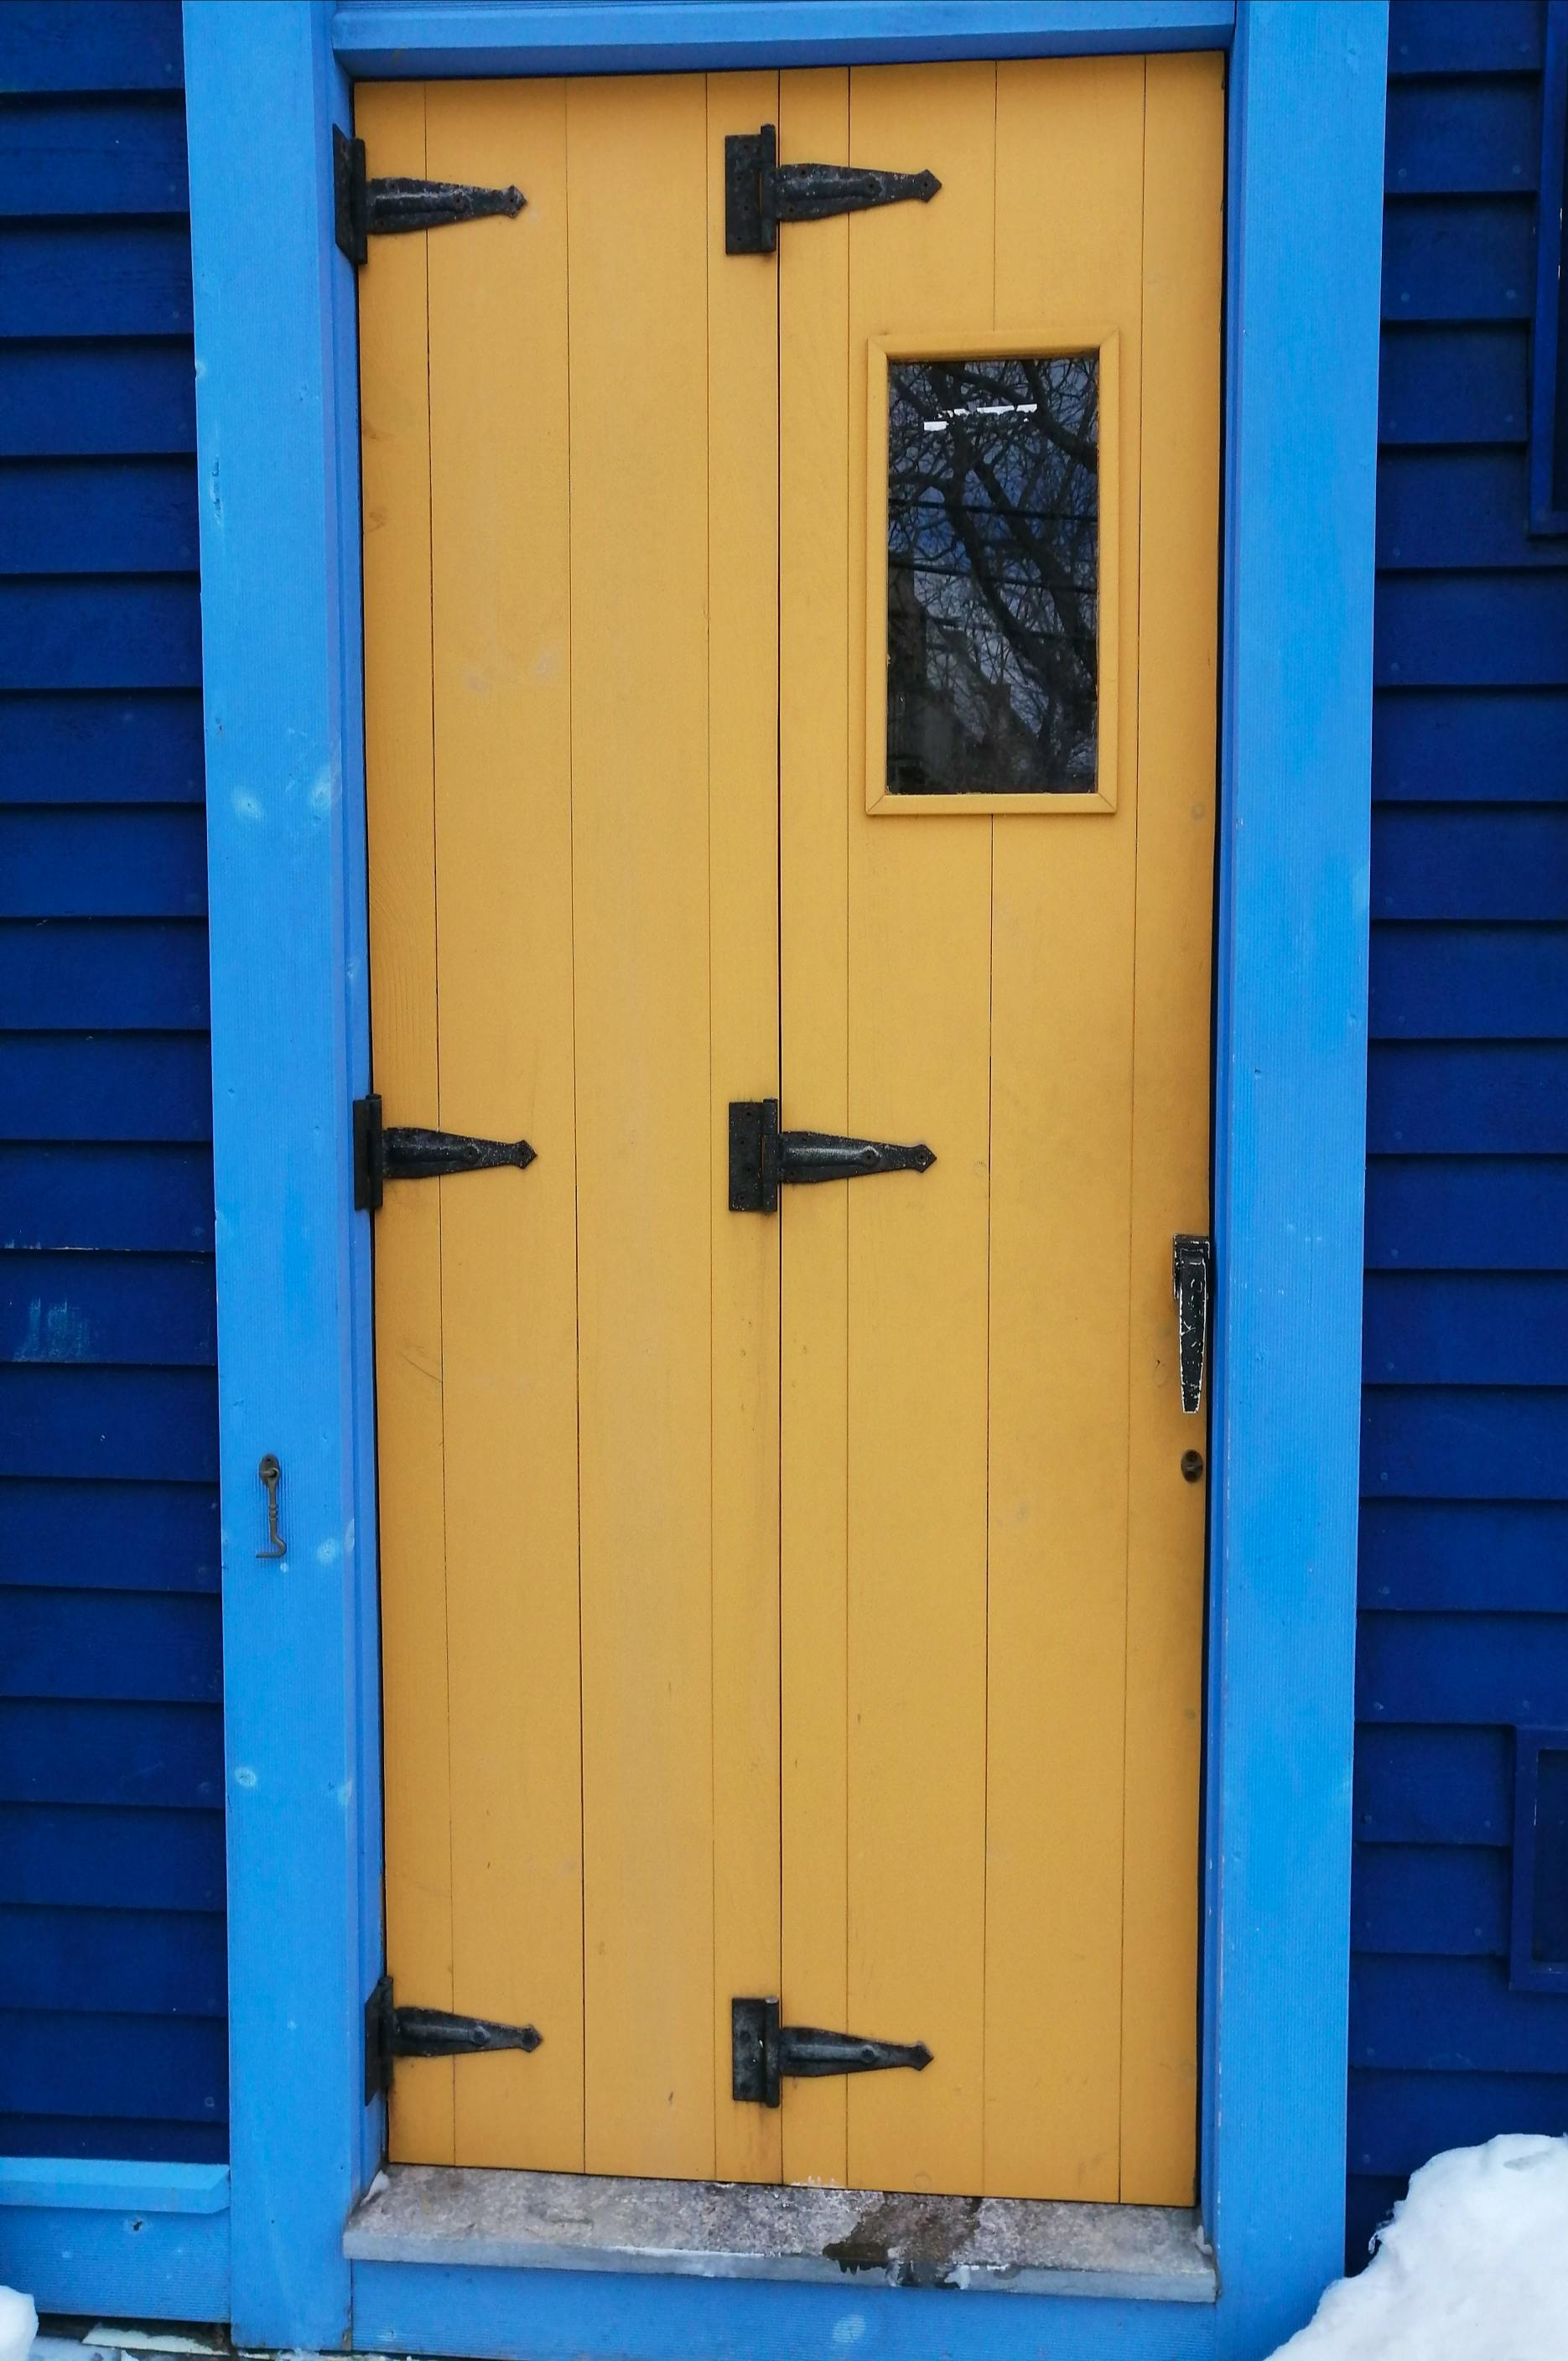 Gary Mitchell sent this photo of an eye-catching, old-time stormdoor on Jellybean Row in St John's, N.L. He says the design allows the door to be open halfway when the weather is "Not Fit or The Pitts."

Thank you, Gary, for this classic throwback to the past.